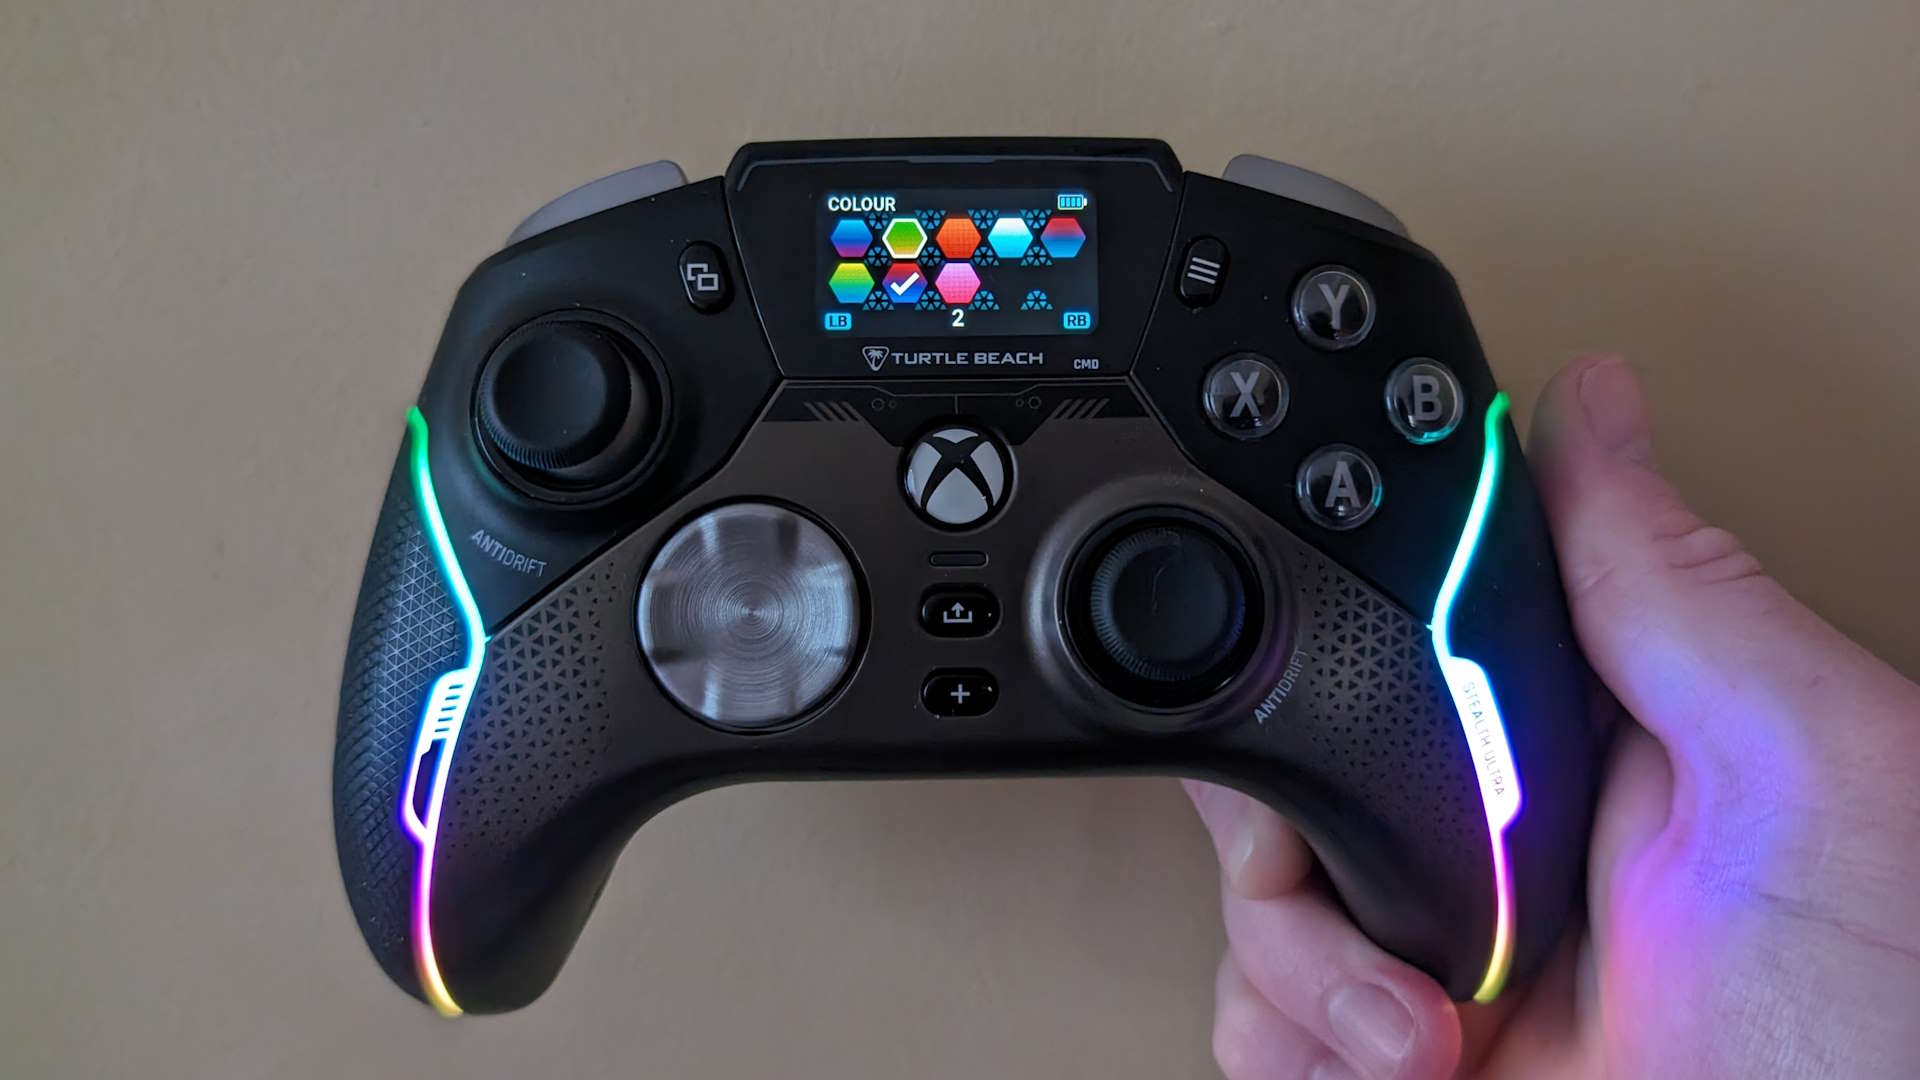 Turtle Beach on X: Introducing the new King of Wireless Controllers - the Stealth  Ultra 👑 📺 Connected Command Display 👍 AntiDrift™ Thumbsticks 🔋 Rapid  Charge Dock 🌈 Colorful RGB 💻 @Xbox